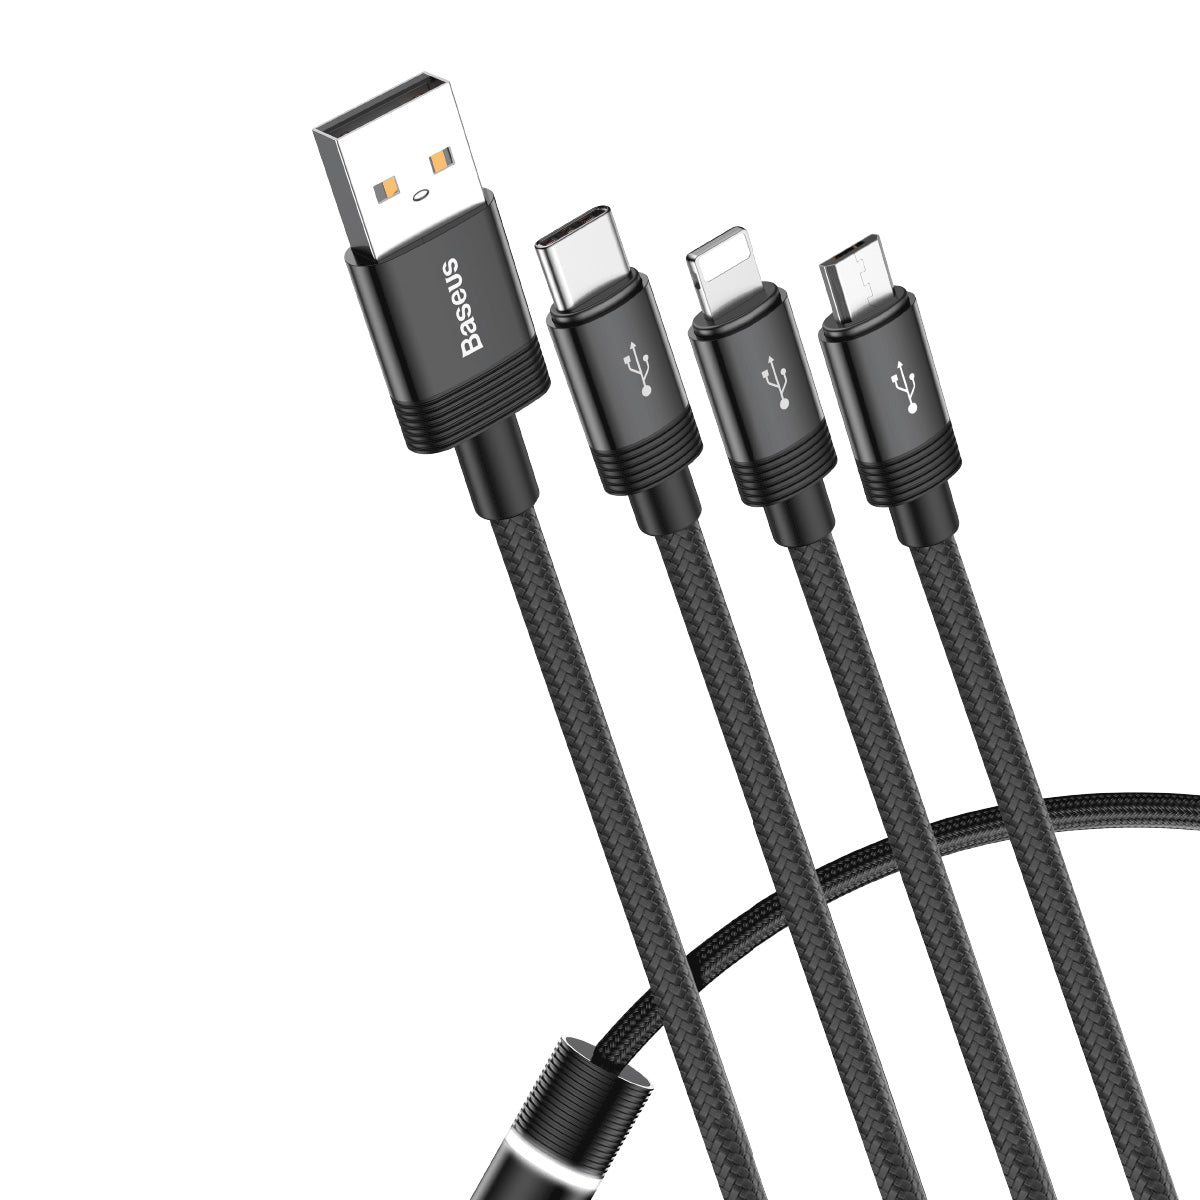 70-4CAMLT-PY01 (Micro +Type C+ iPhone) 3-in-1 Cable, 1.2Meter, 3.5A, Nylon Braided, Black